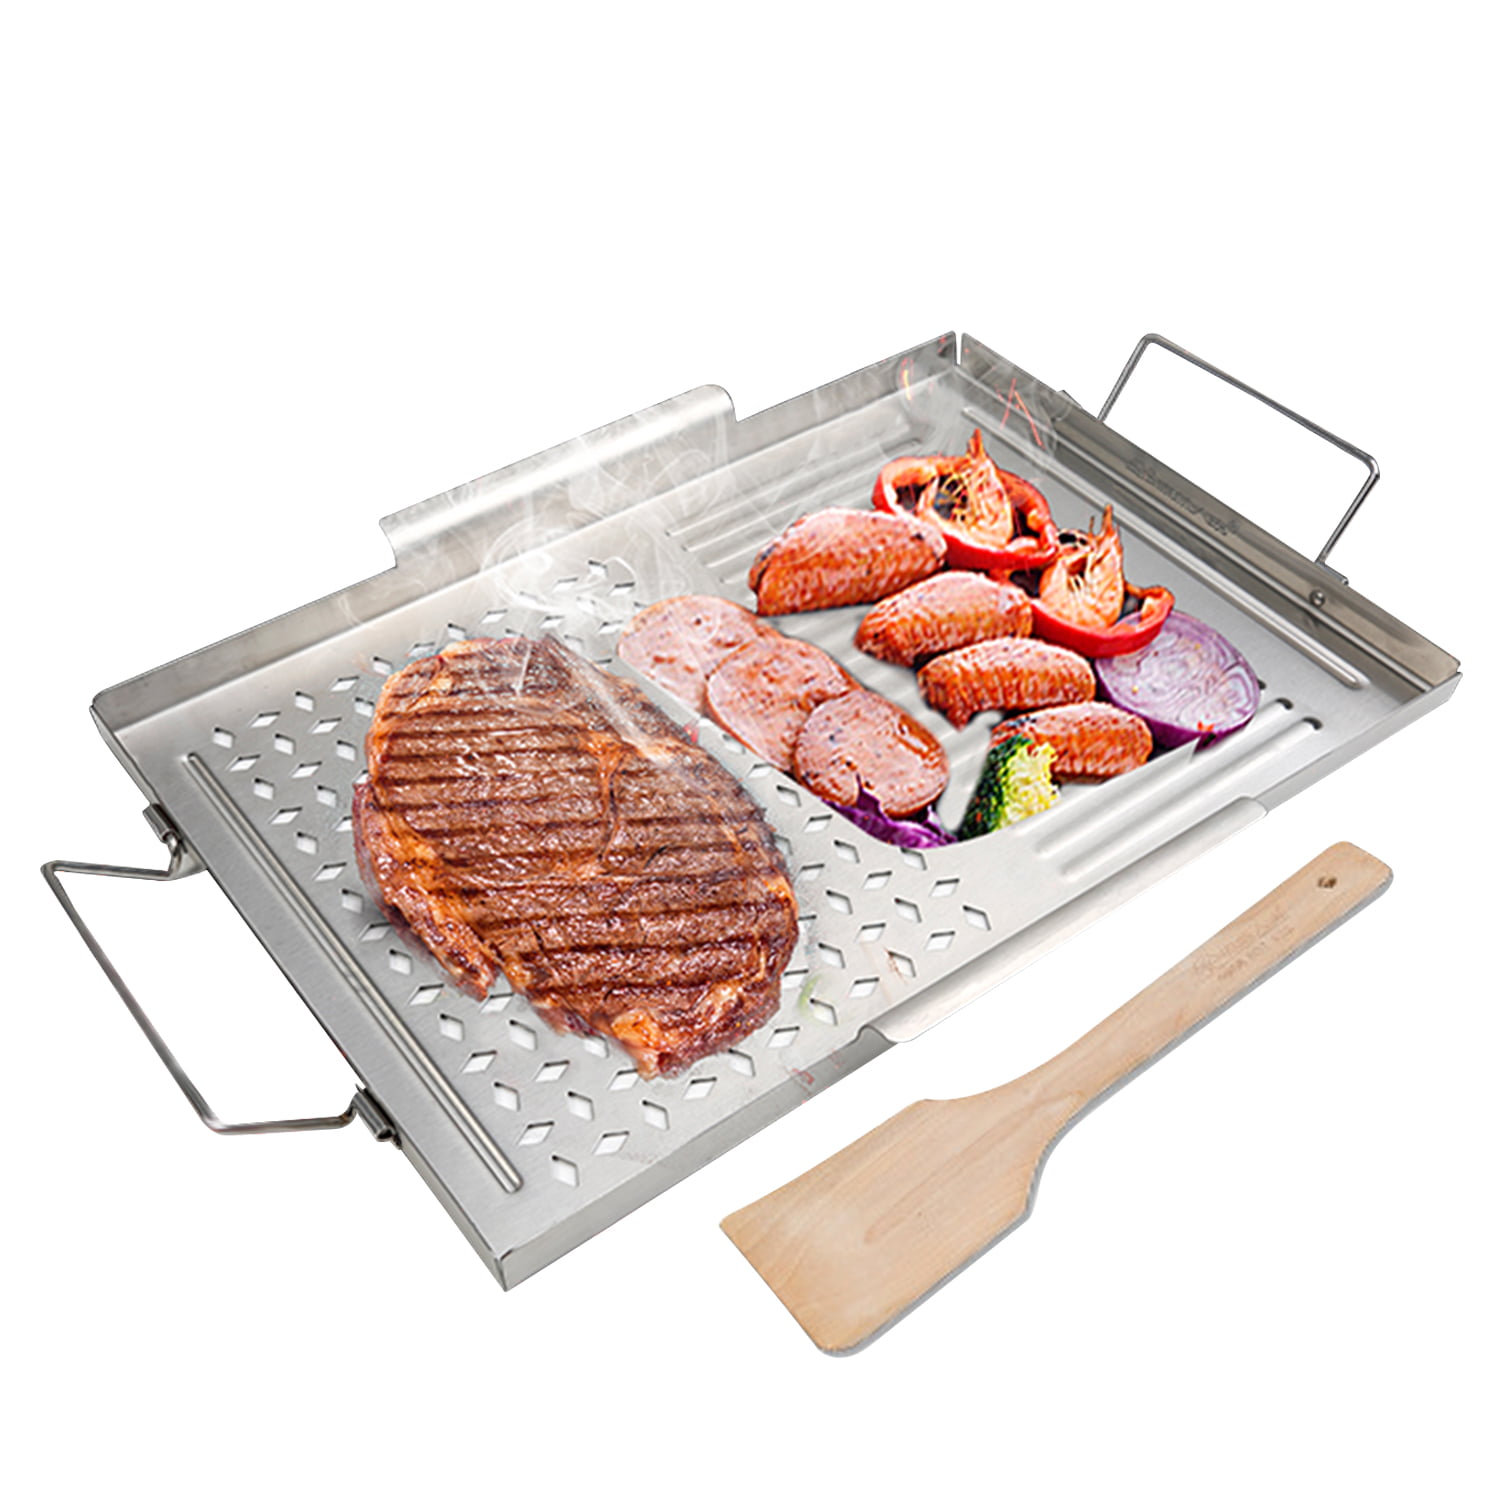 Portable BBQ Grilling Basket Stainless Steel Nonstick Grill Barbecue KitchenTool 